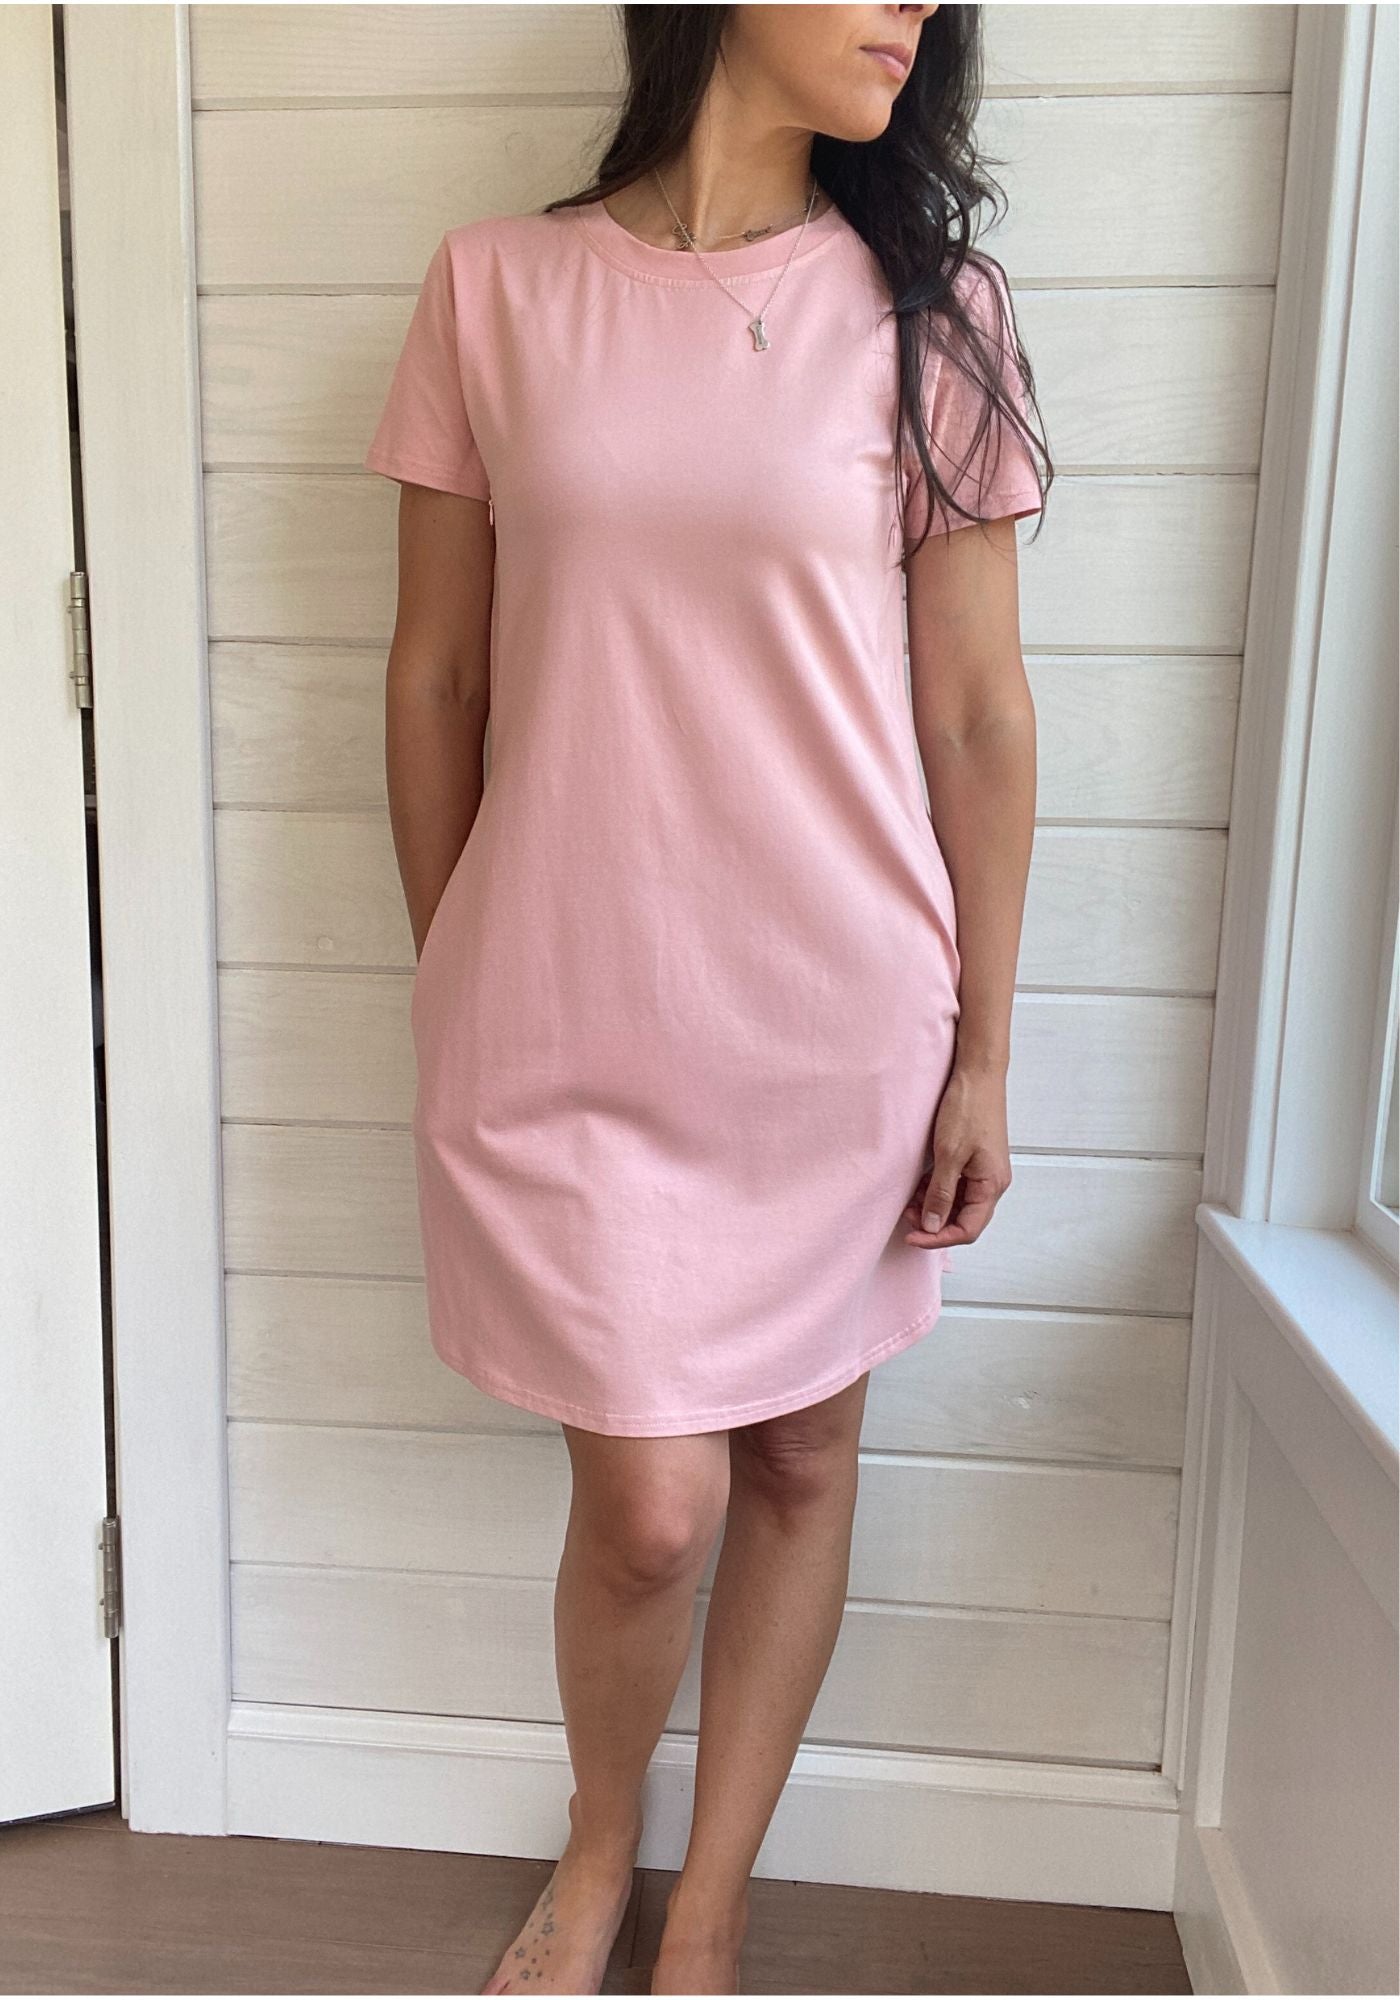 Breastfeeding T-Shirt Dress in Light pink. Two Zippers on right and left side to provide accessibility to nursing mothers. Pockets, rounded hem with two small slits on either side. T-Shirt Style dress perfect to nurse your child in.